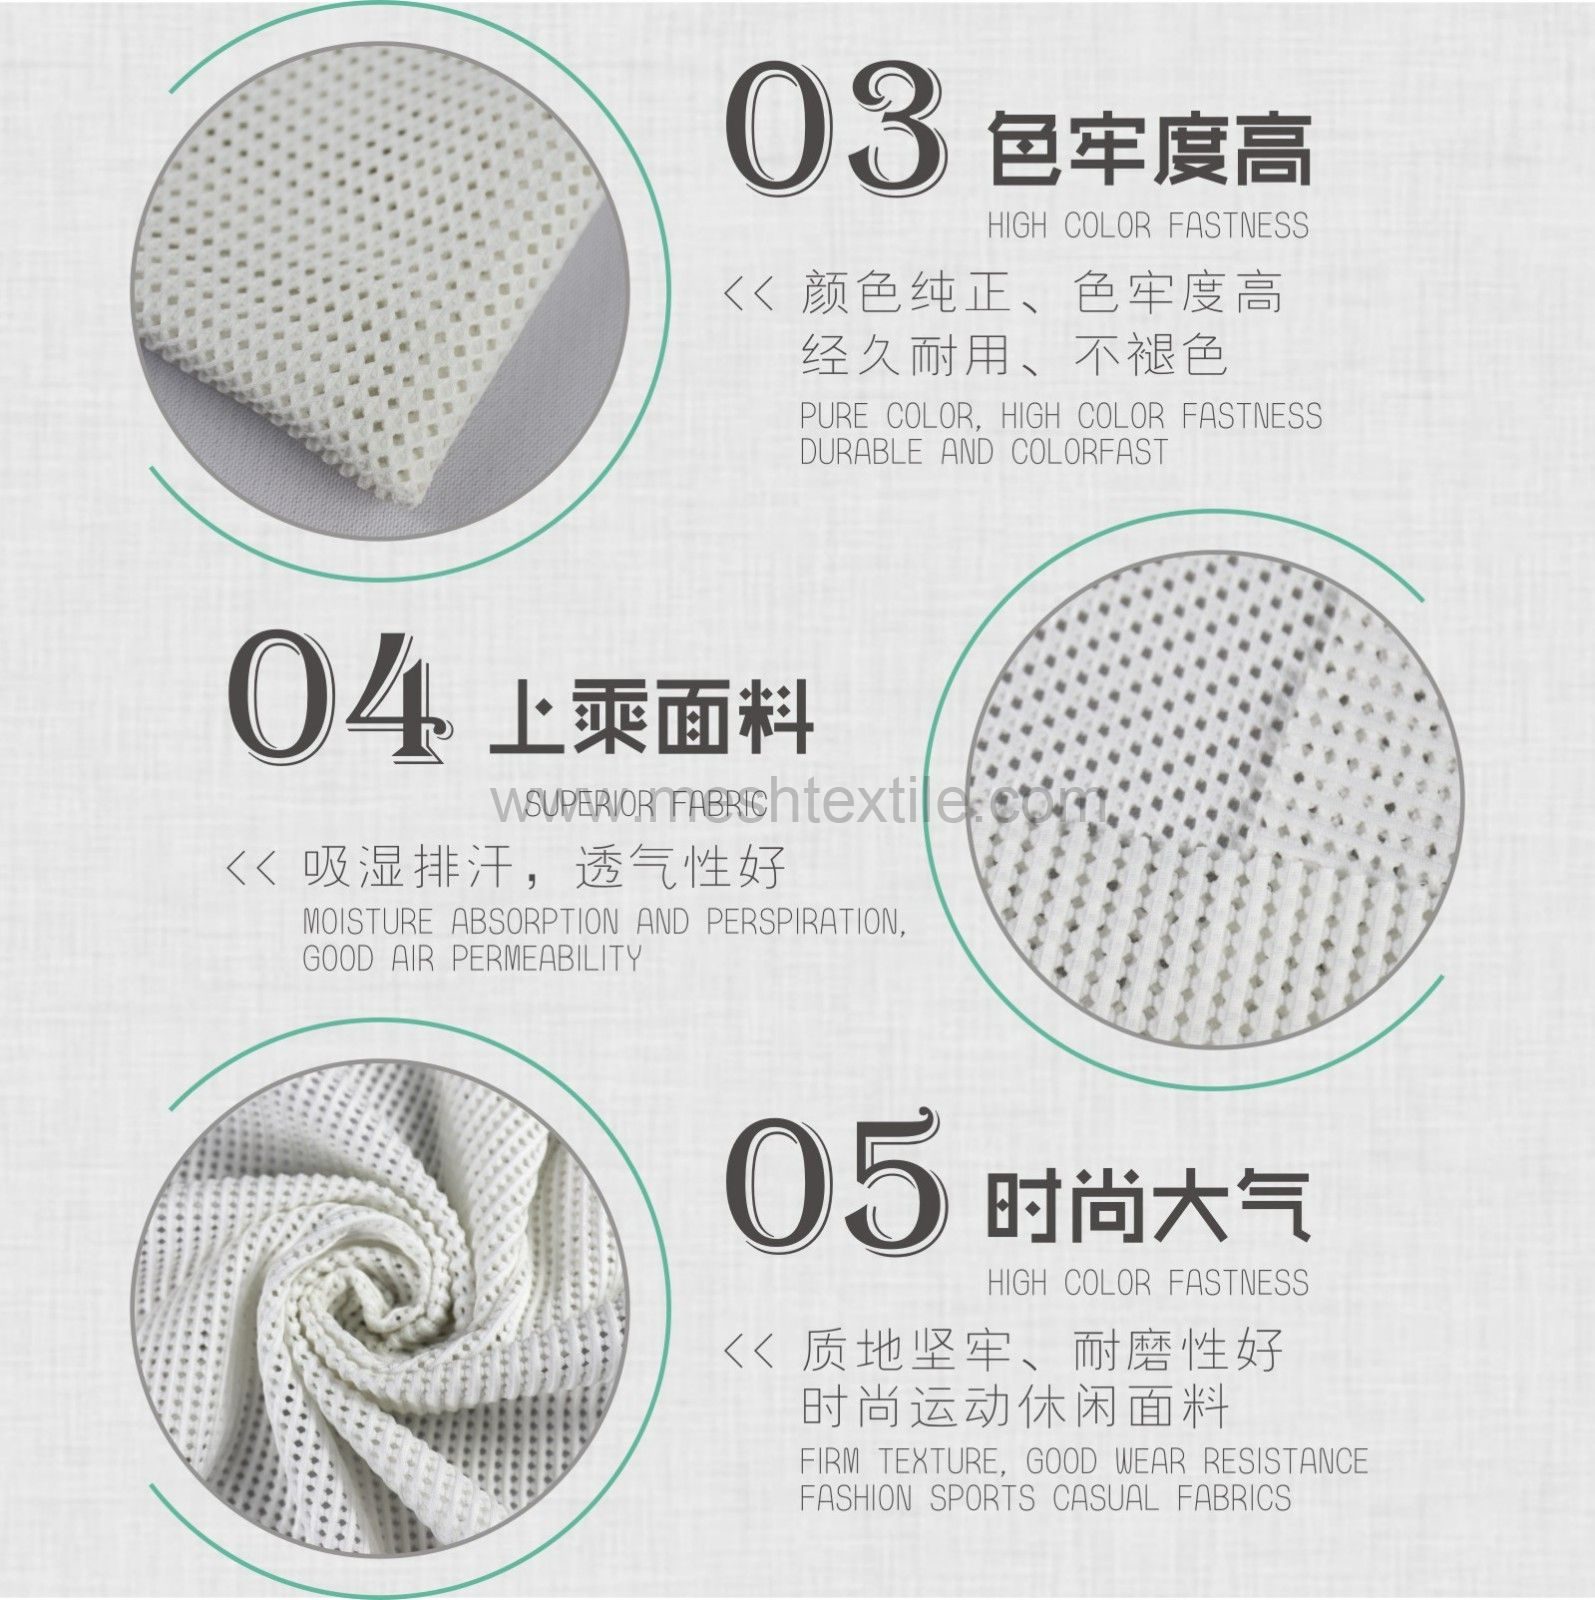 spacer mesh material  by yard